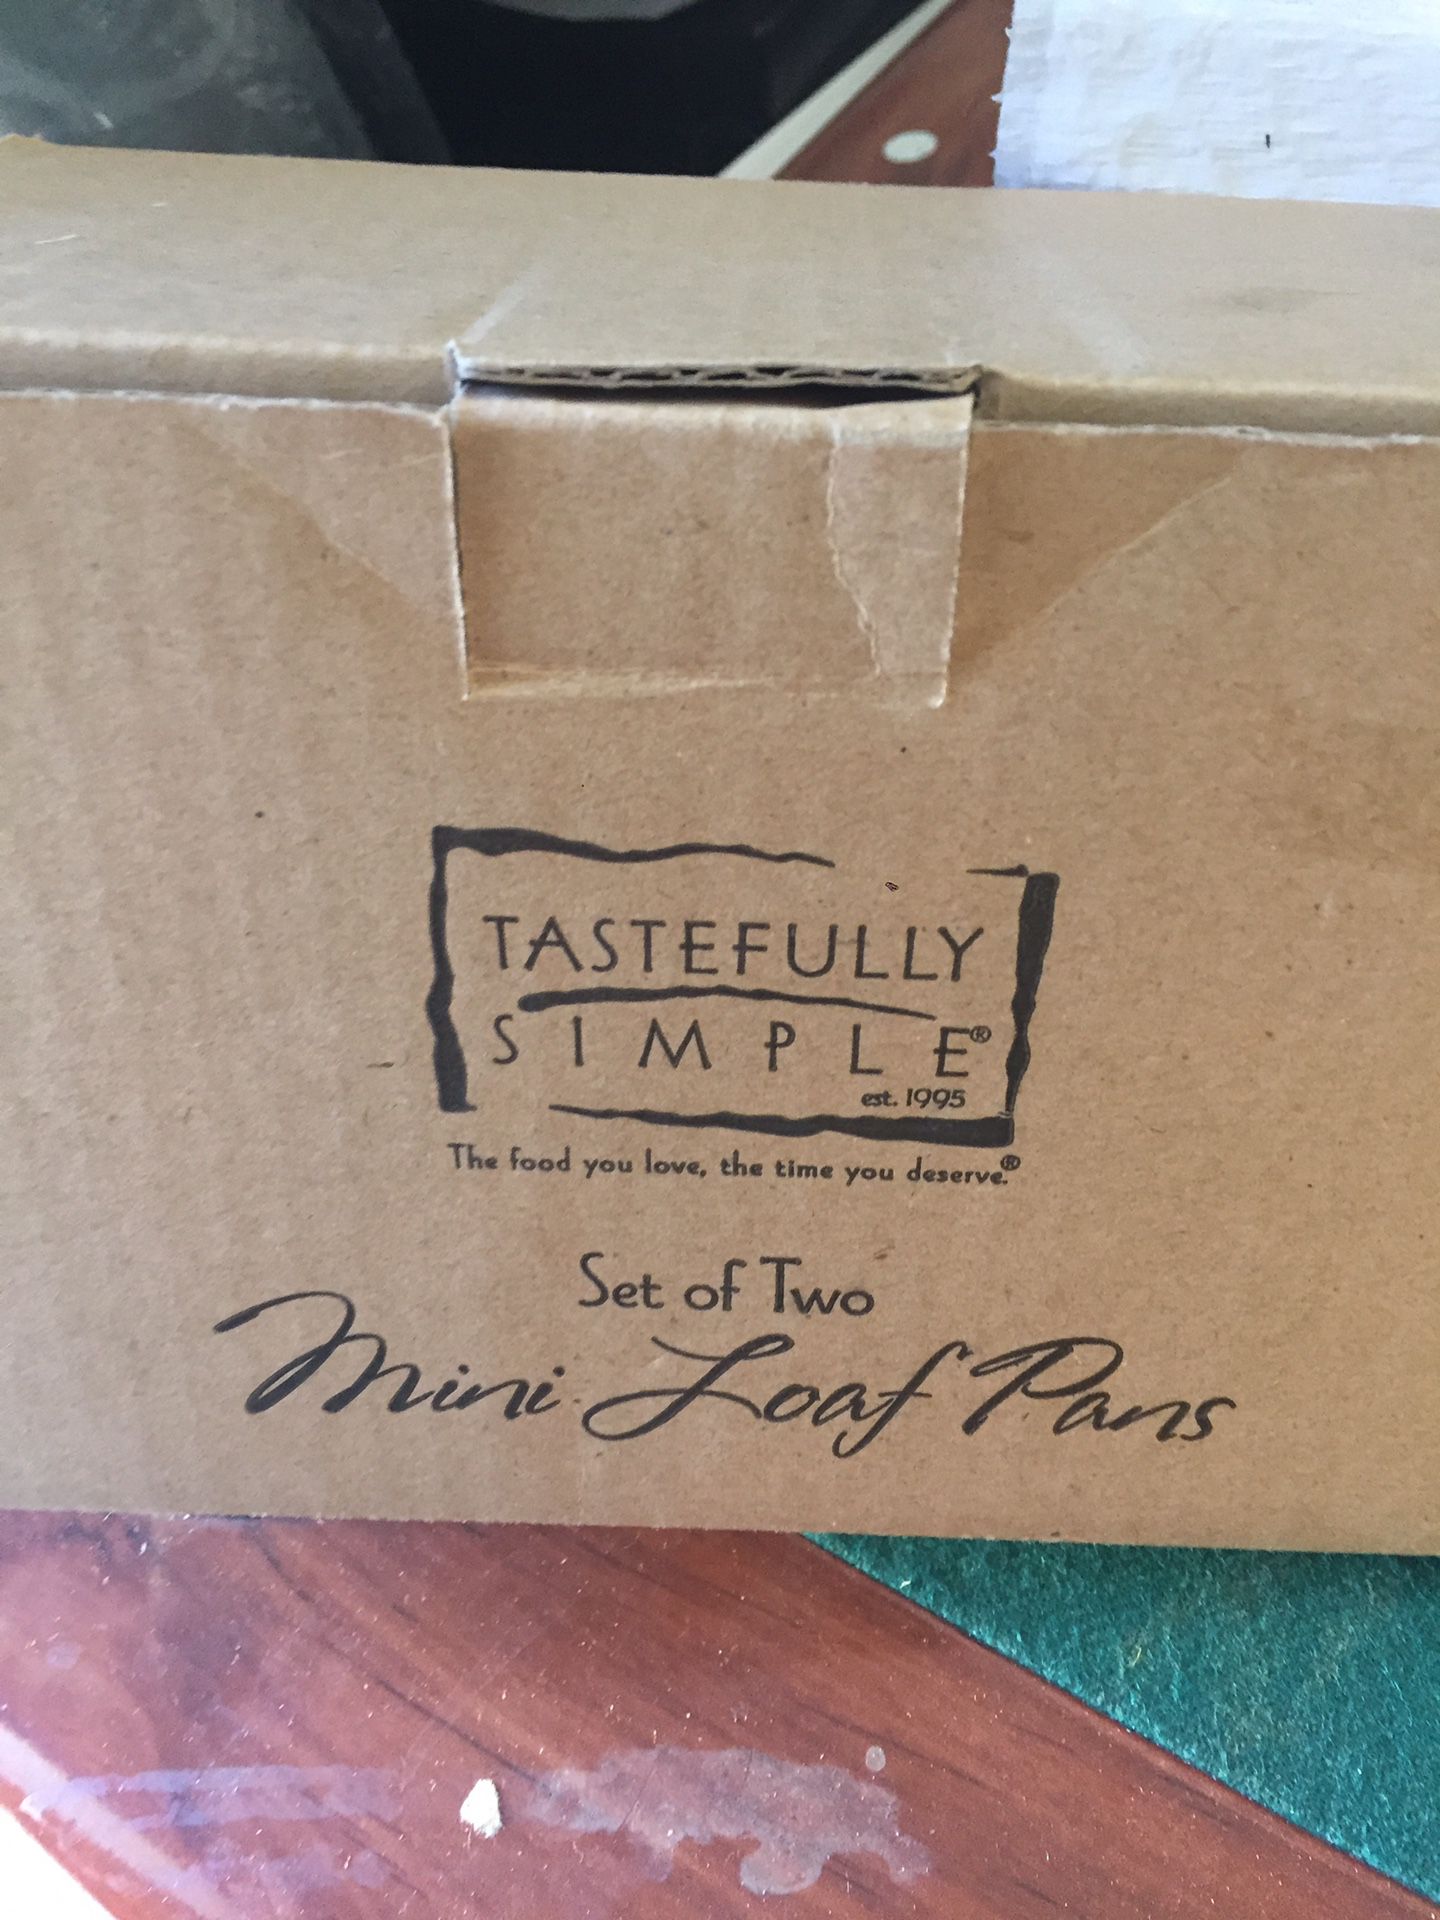 New in box tastefully simple set of two mini loaf pans